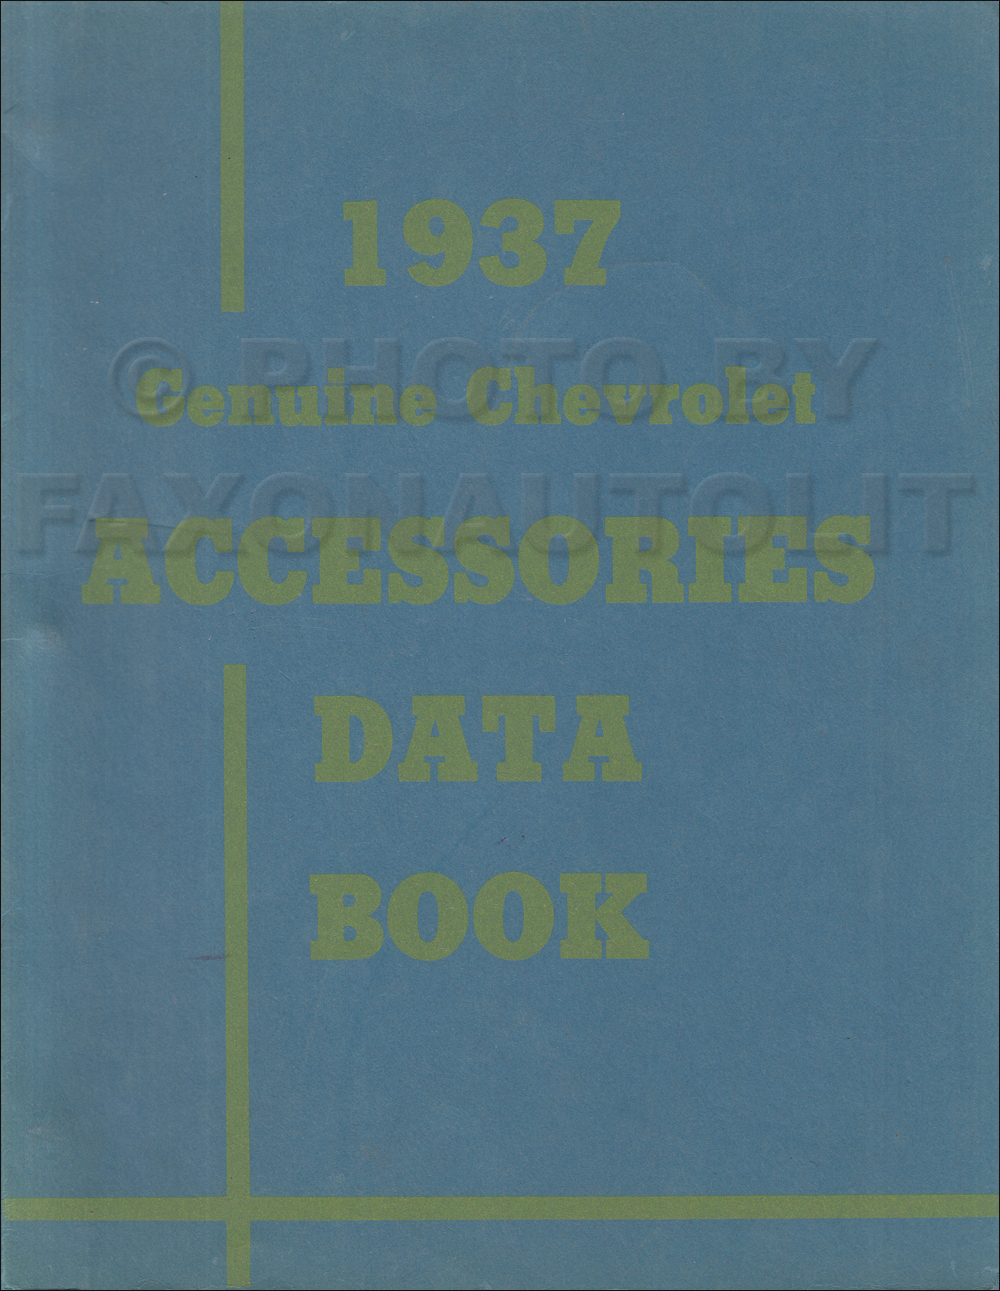 1937 Chevrolet Accessories Data Book Out-of-Print Reprint